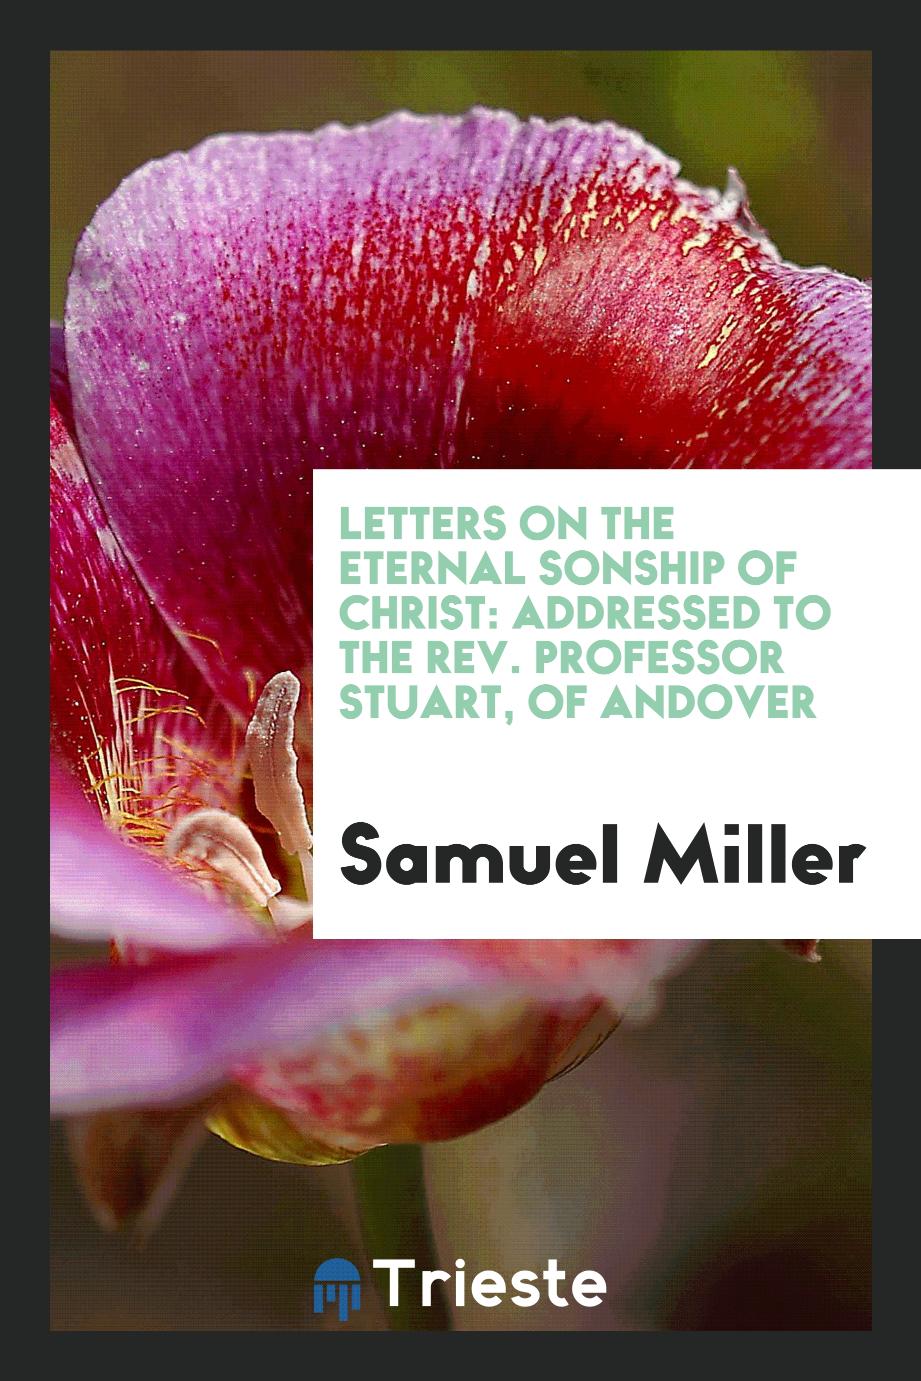 Letters on the Eternal Sonship of Christ: Addressed to the Rev. Professor Stuart, of Andover